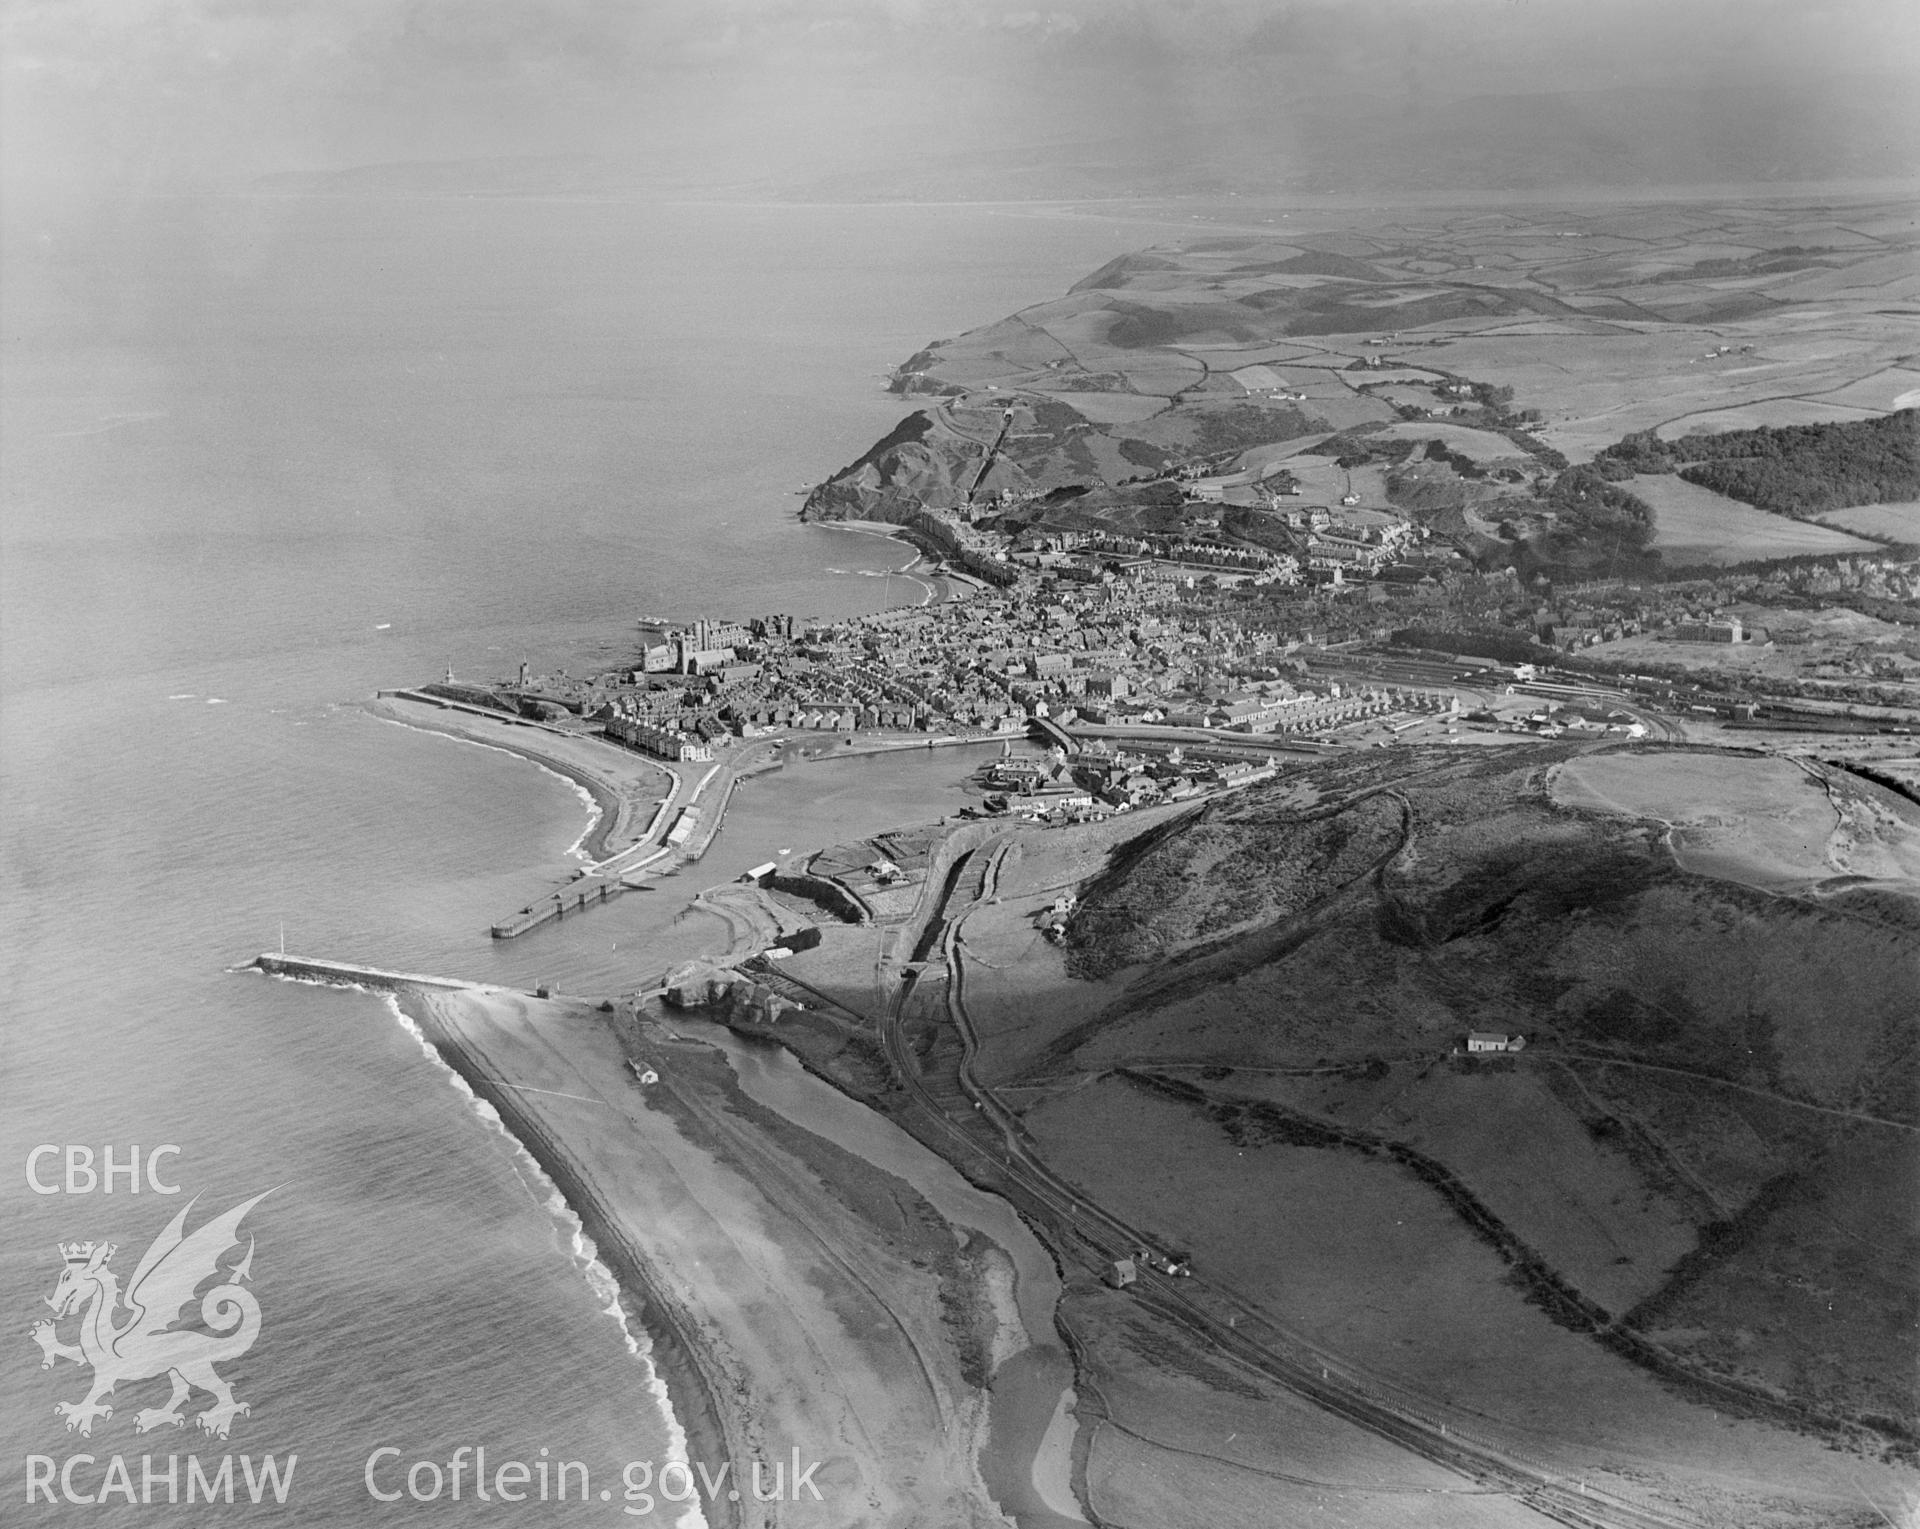 Distant view of Aberystwyth, showing Pen Dinas, oblique aerial view. 5?x4? black and white glass plate negative.